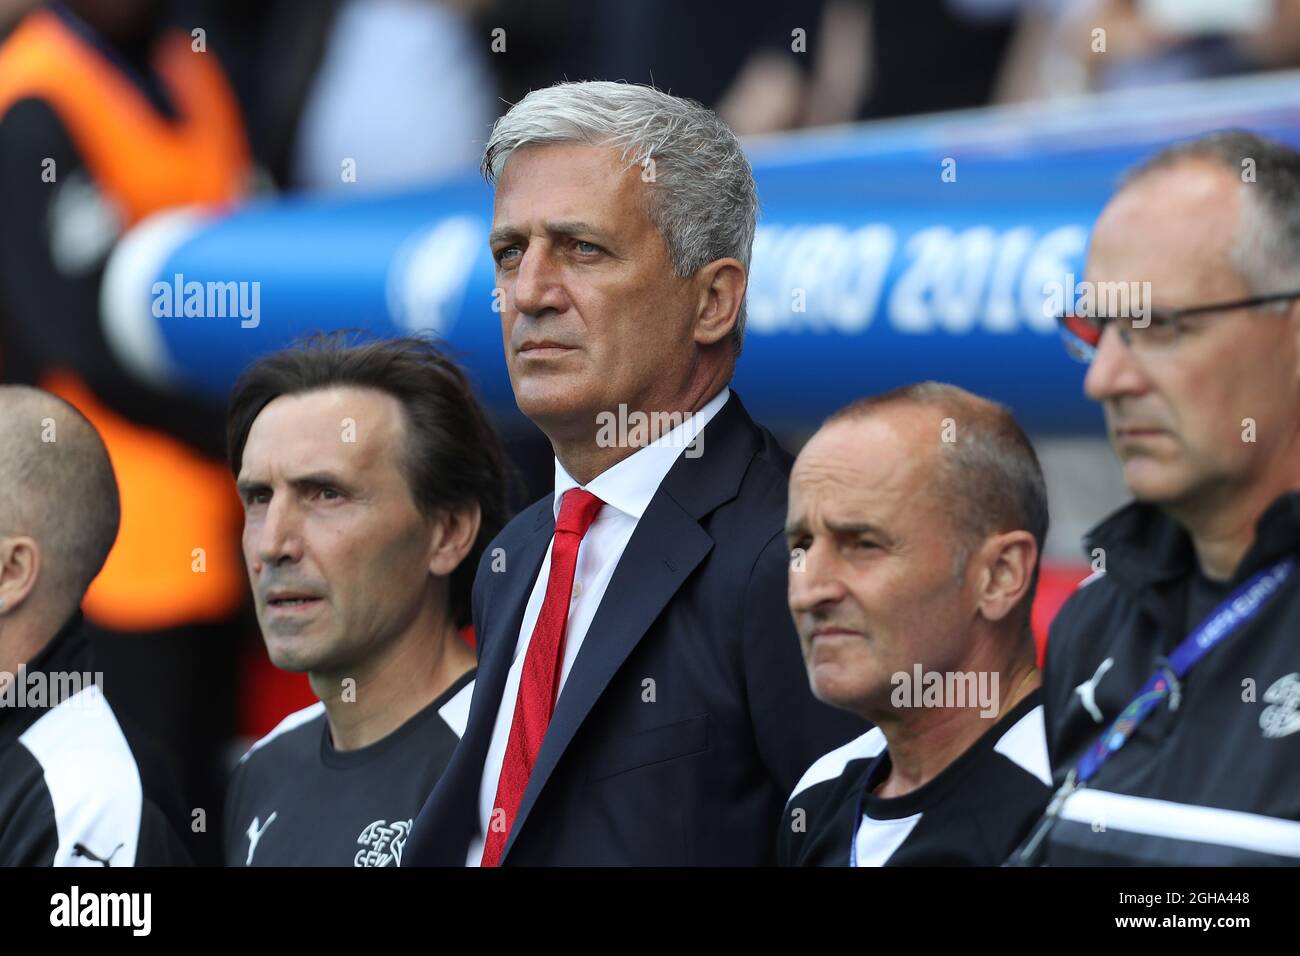 Vladimir Petkovic, head coach of Switzerland during the UEFA European Championship 2016 match at the Parc des Princes, Paris. Picture date June 15th, 2016 Pic Phil Oldham/Sportimage via PA Images Stock Photo